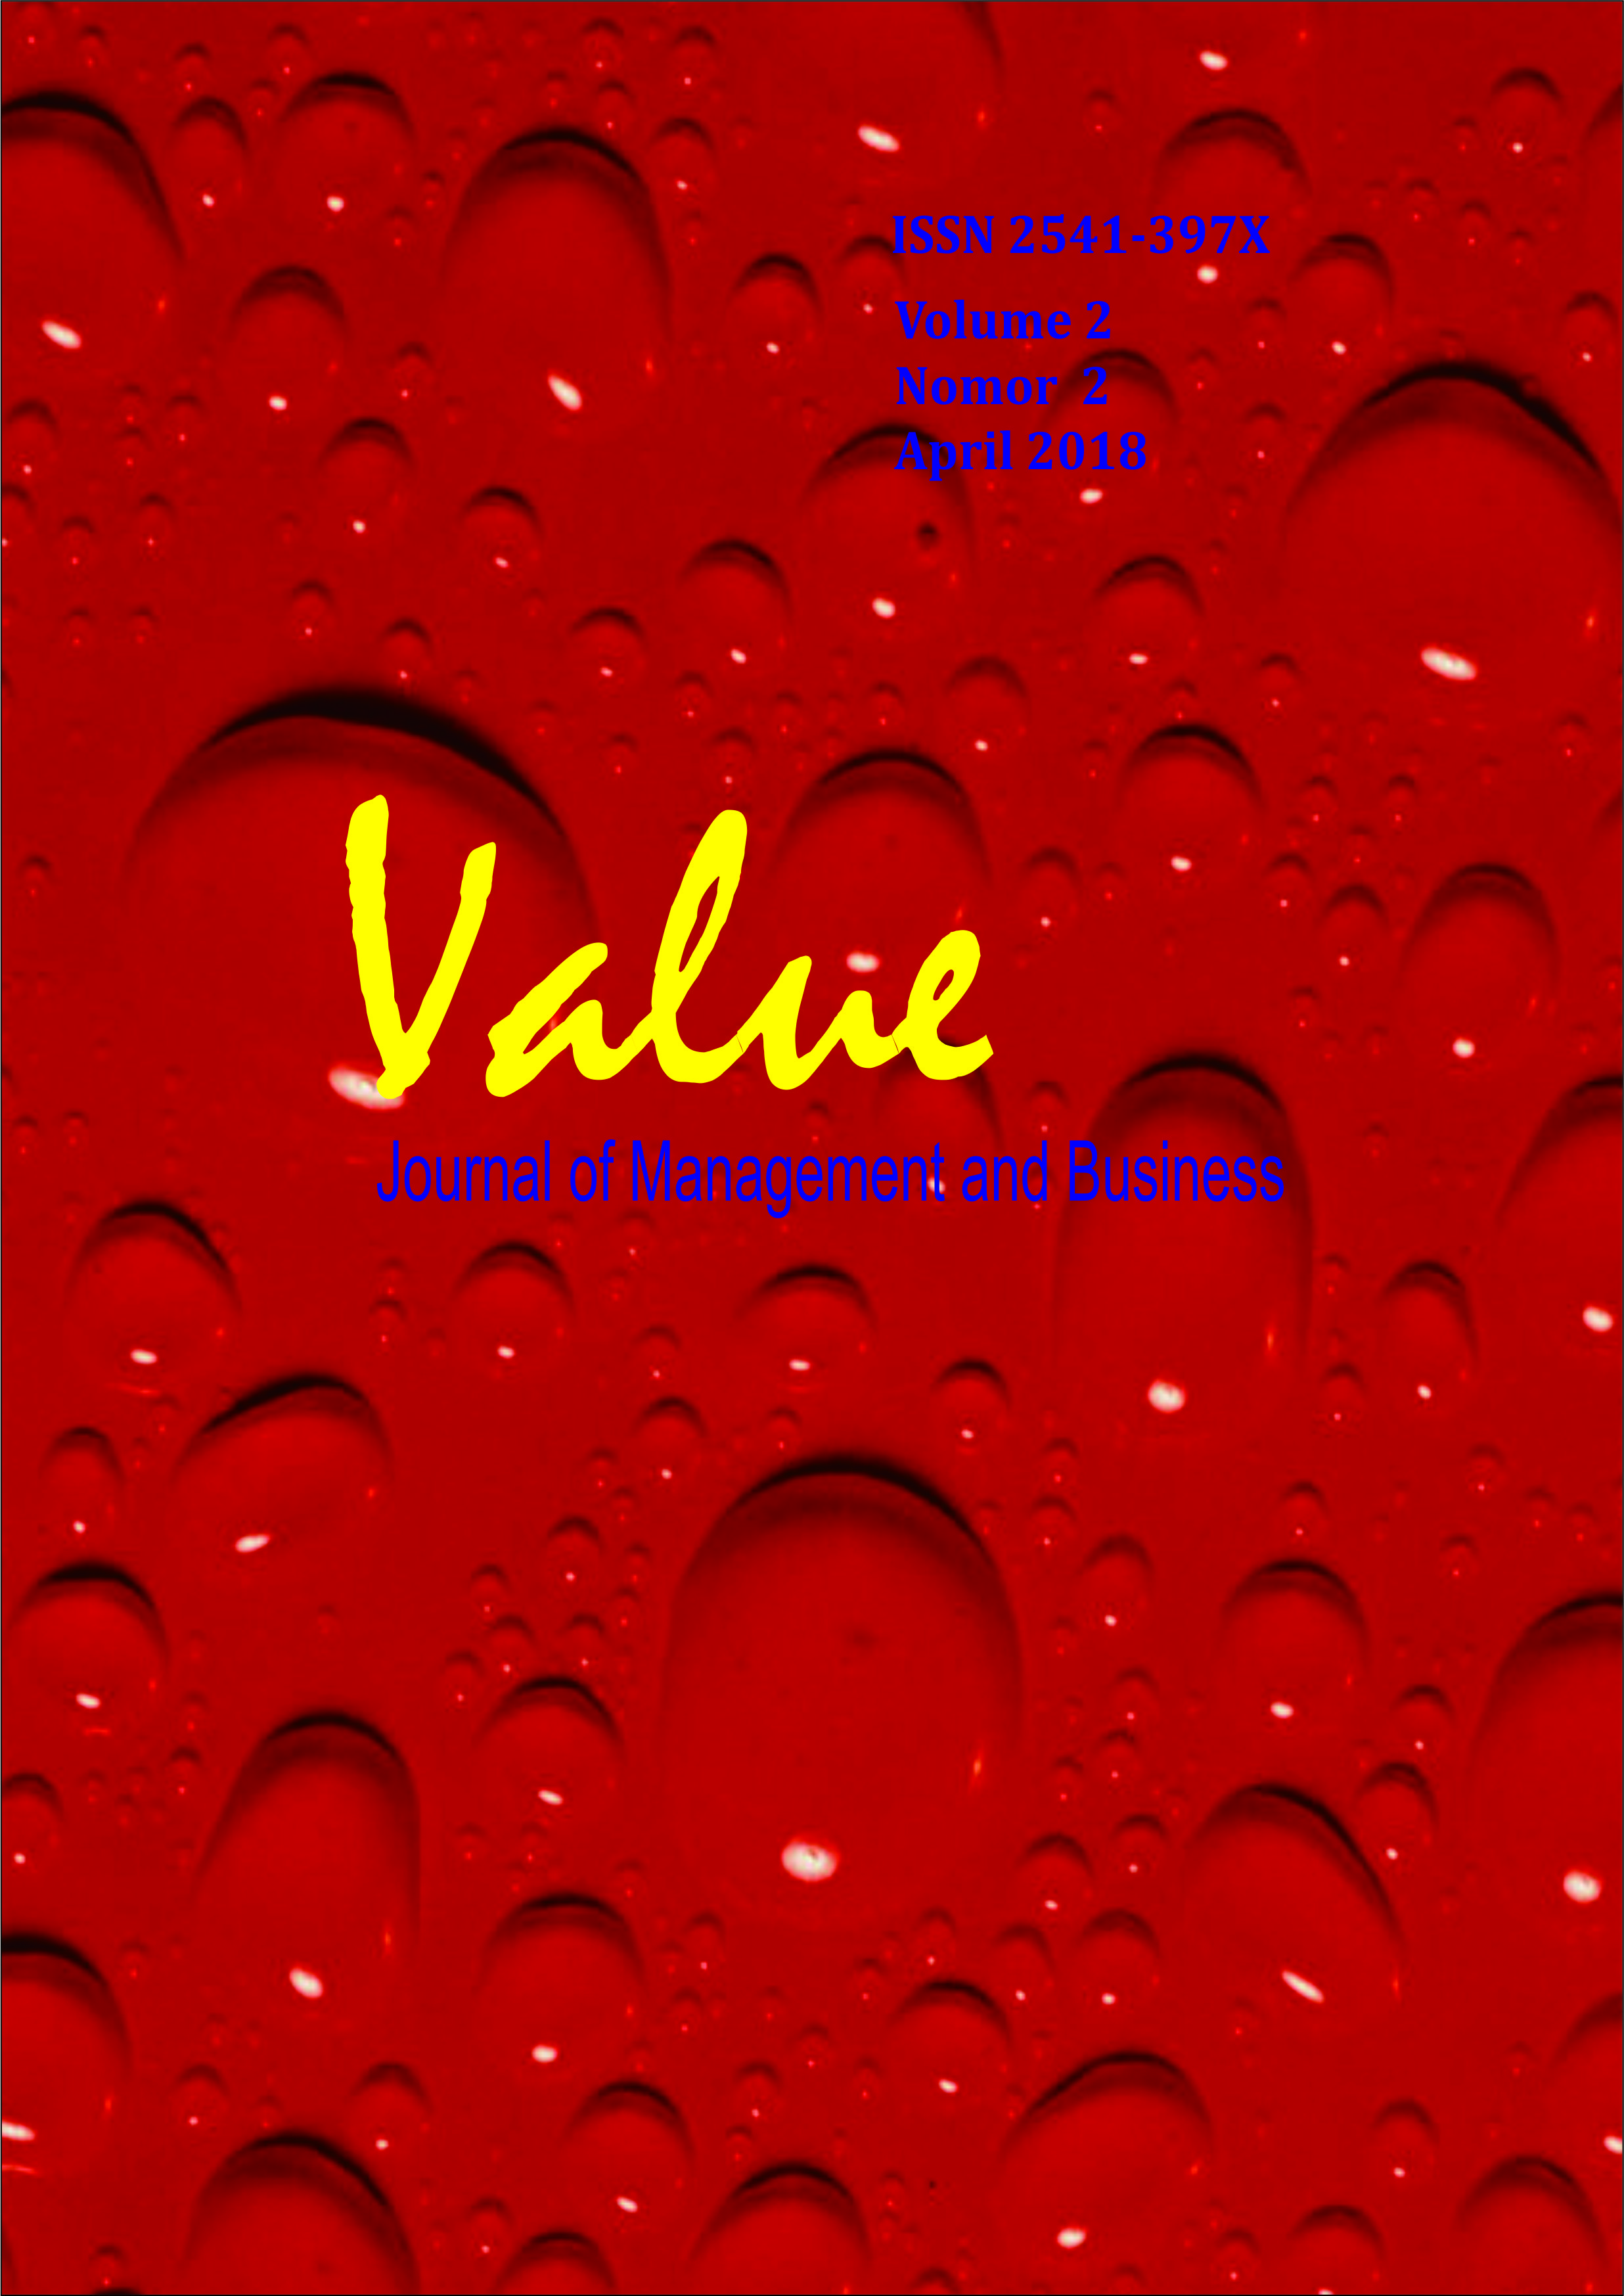 					View Vol. 2 No. 2 (2018): Value Journal of Management and Business
				